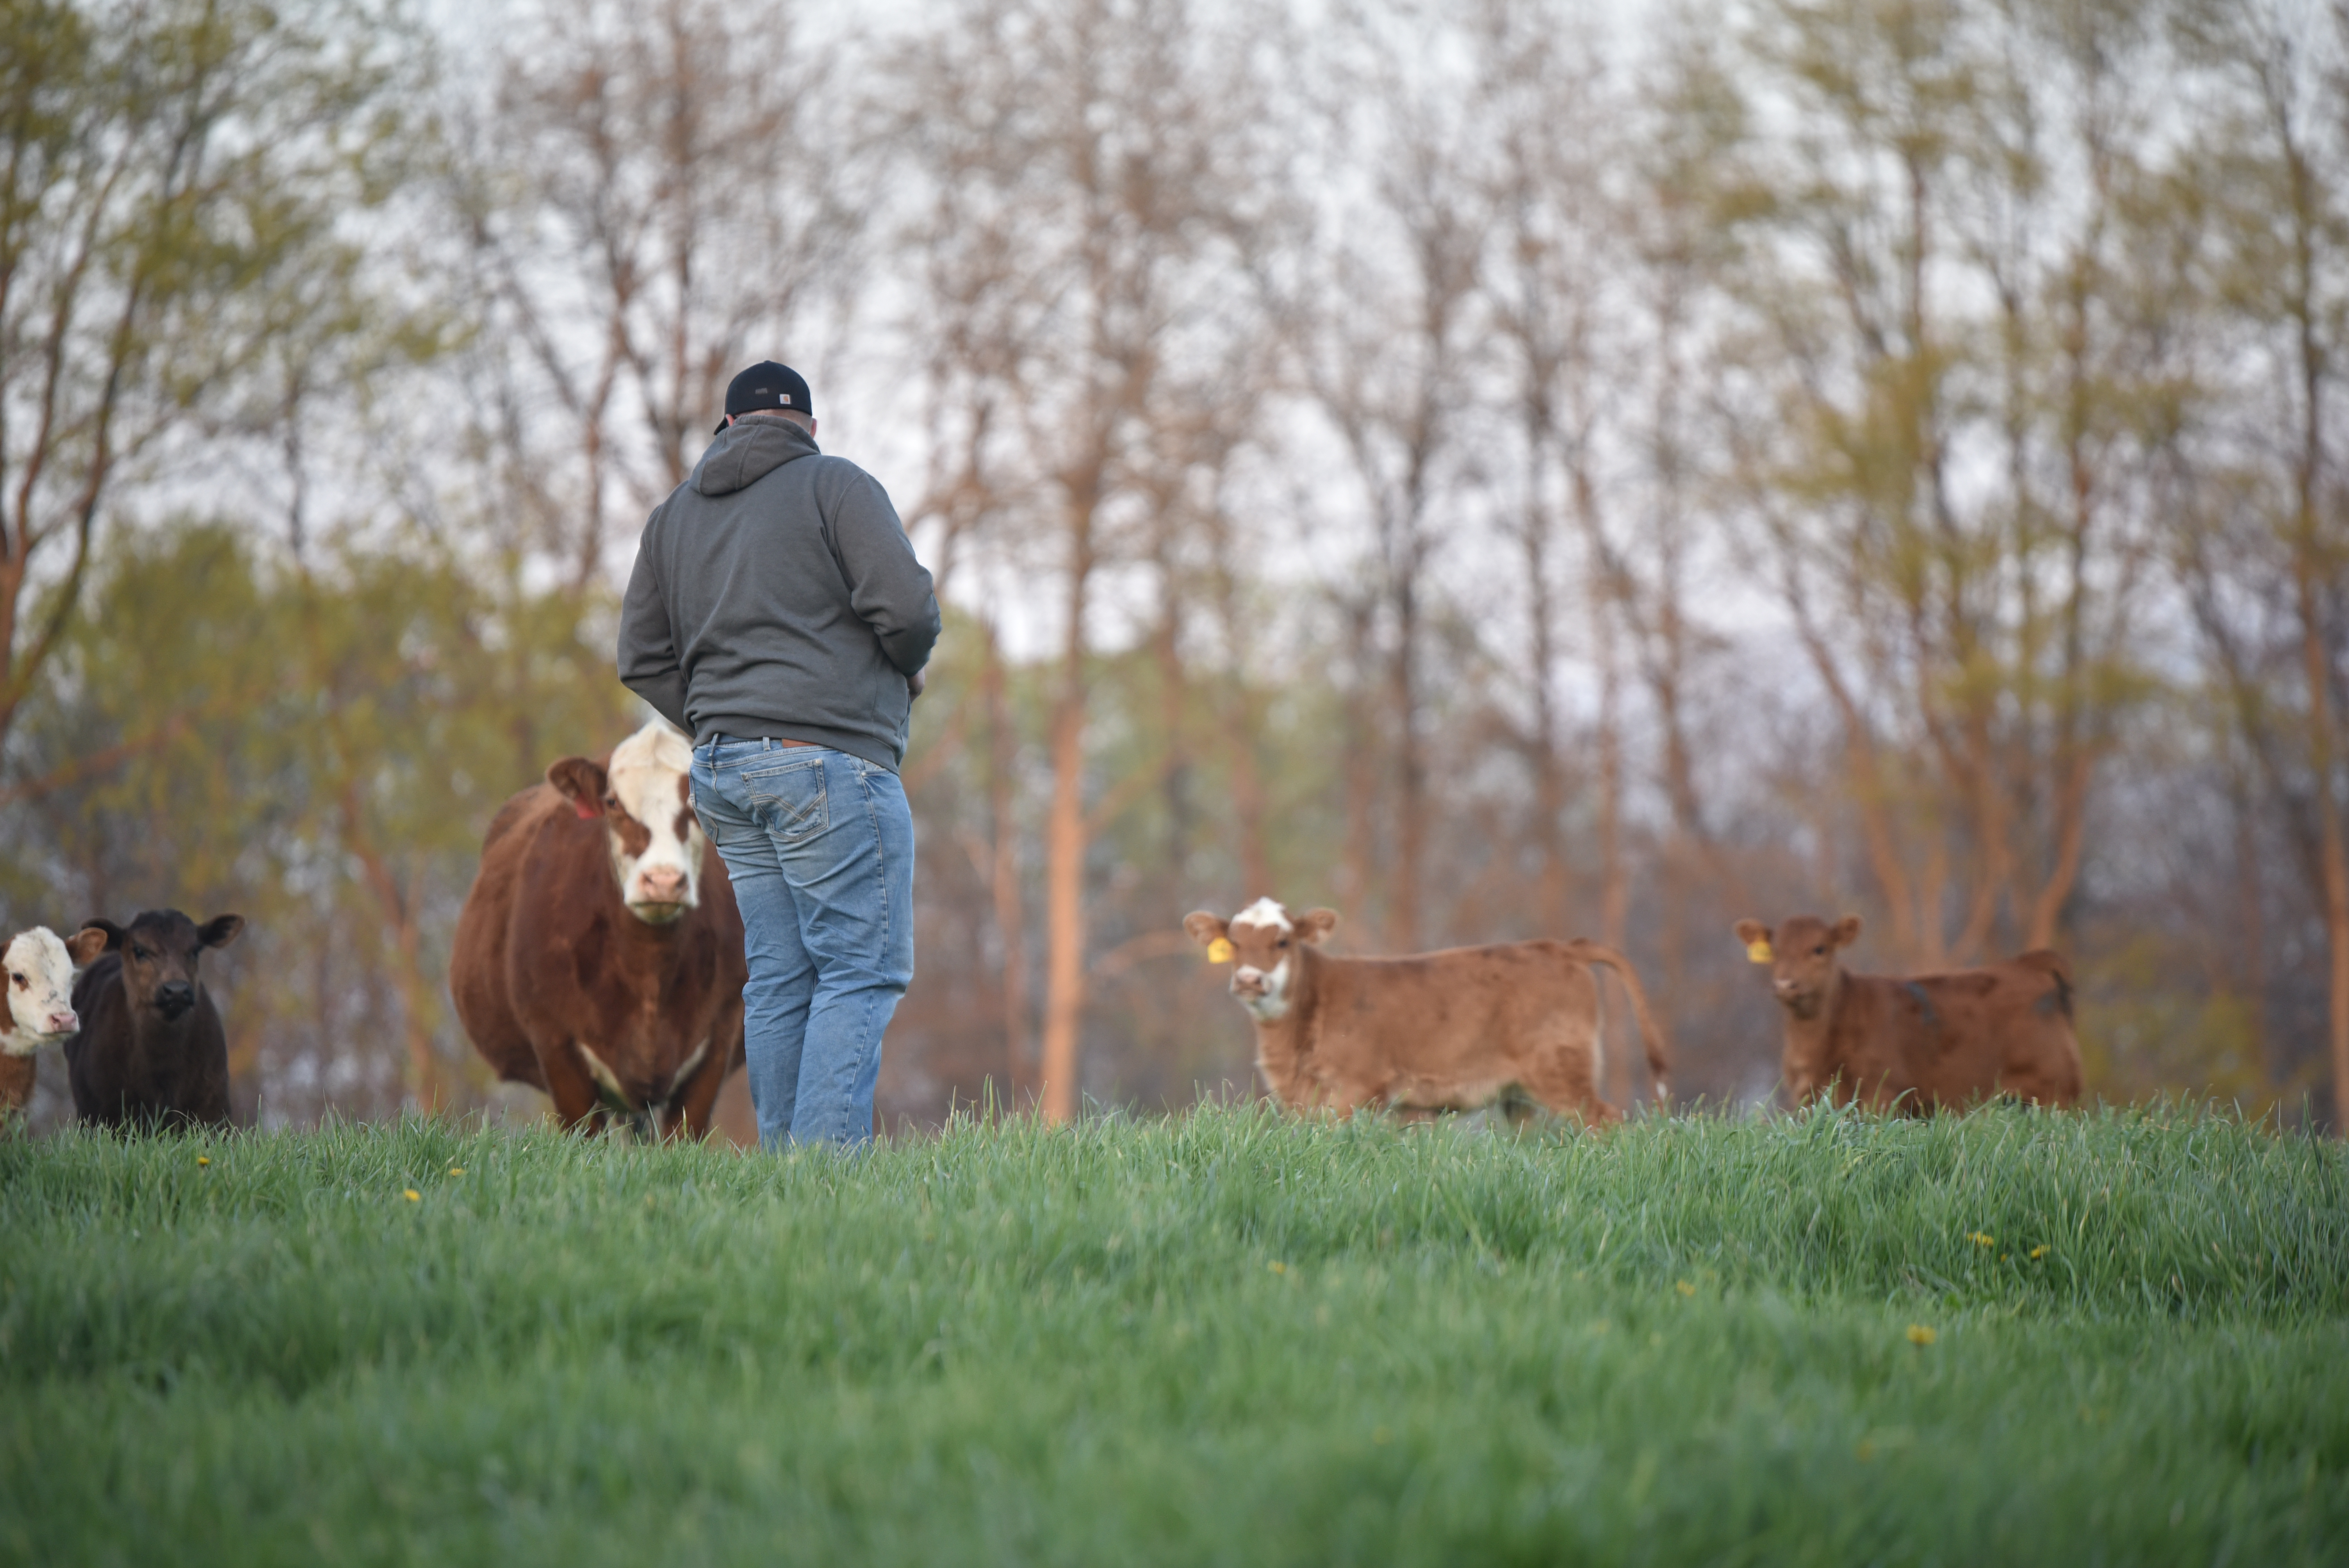 Become immersed in Ohio’s beef industry through the Beef Industry Fellowship Grant